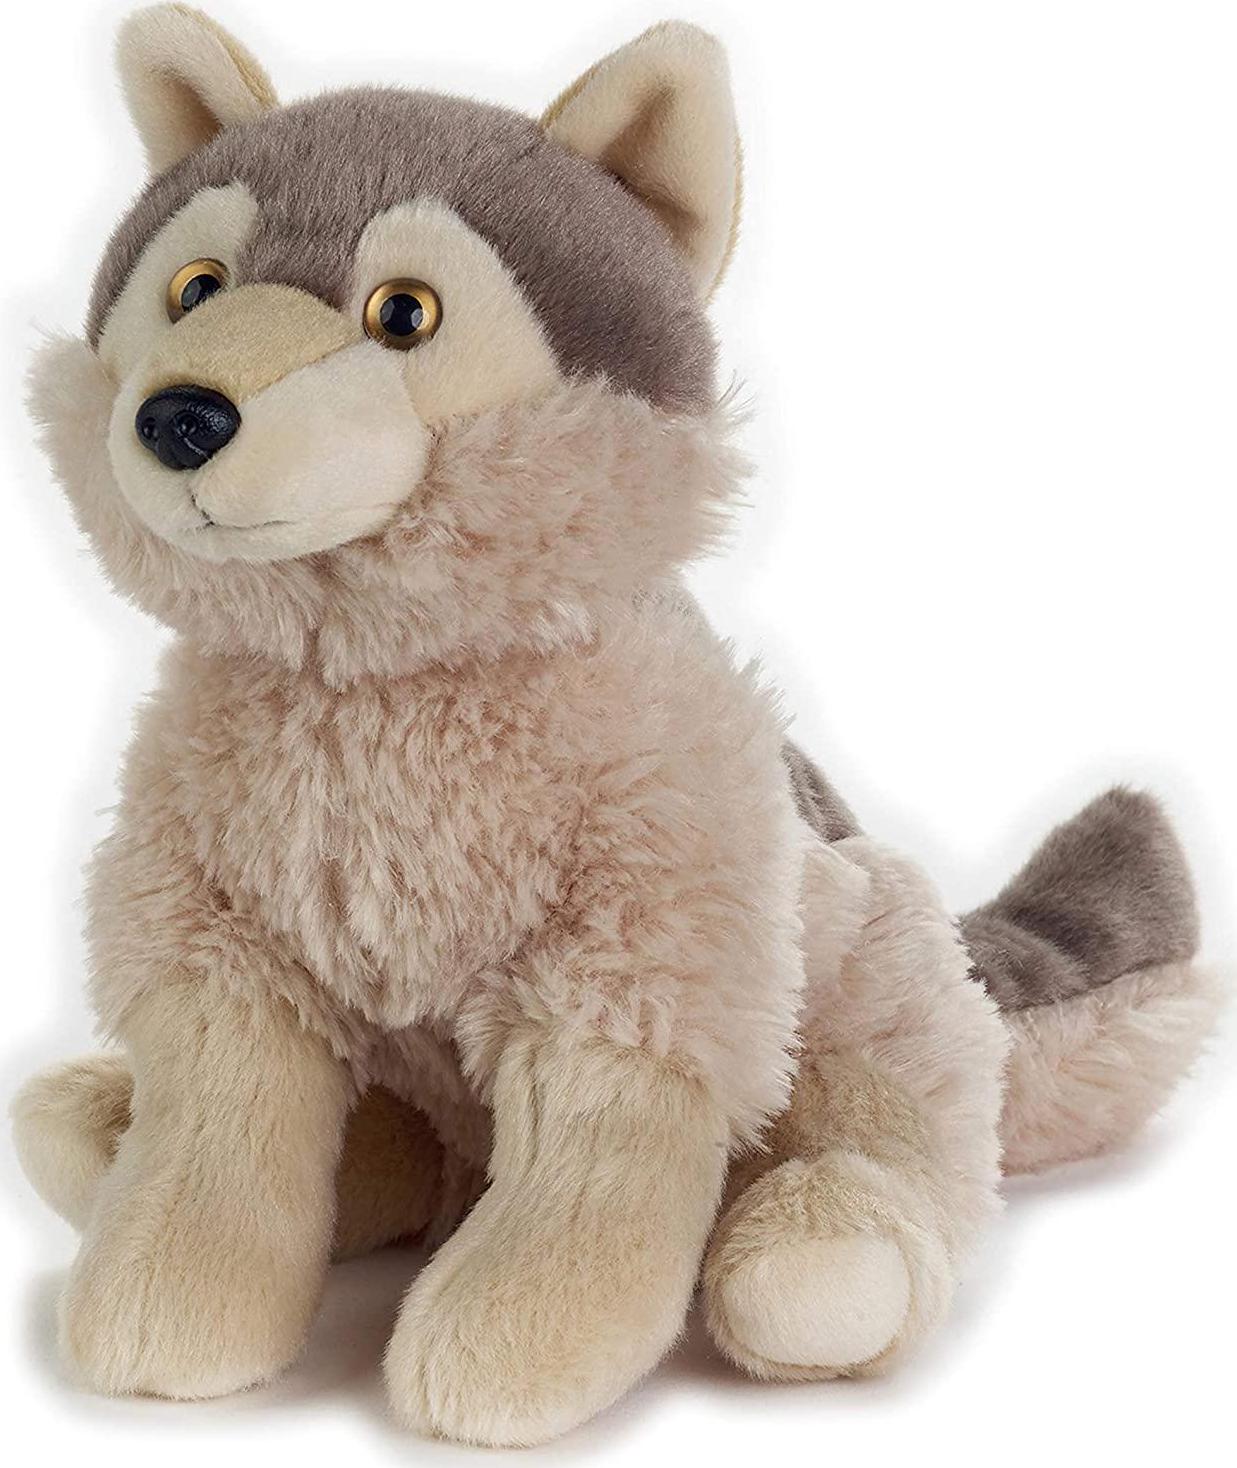 Venturelli, Lelly - National Geographic Basic Collection Plush, Wolf